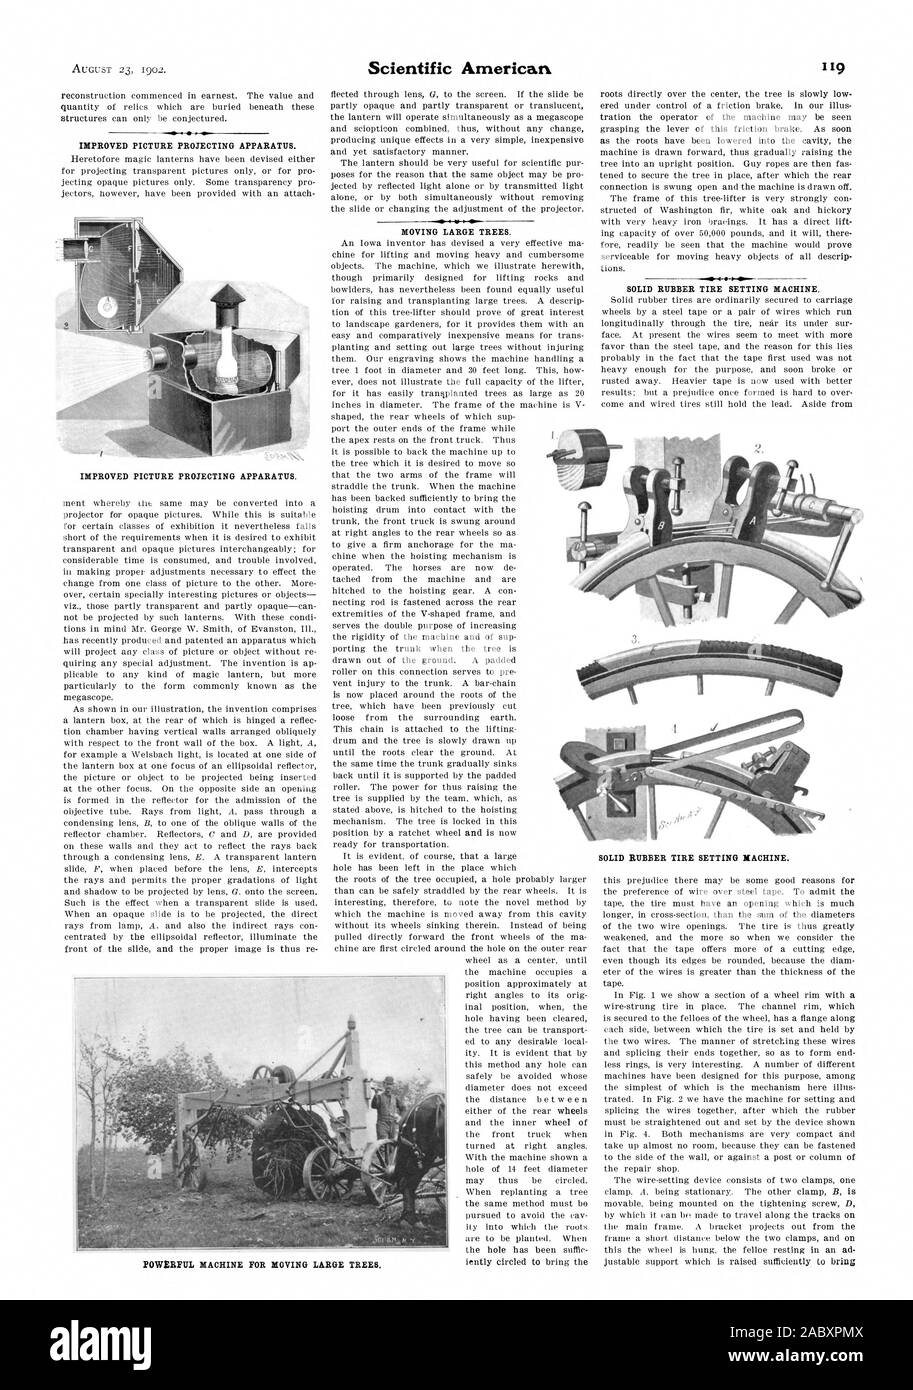 IMPROVED PICTURE PROJECTING APPARATUS. MOVING LARGE TREES. SOLID RUBBER TIRE SETTING MACHINE. POWERFUL MACHINE FOR MOVING LARGE TREES., scientific american, 1902-08-23 Stock Photo